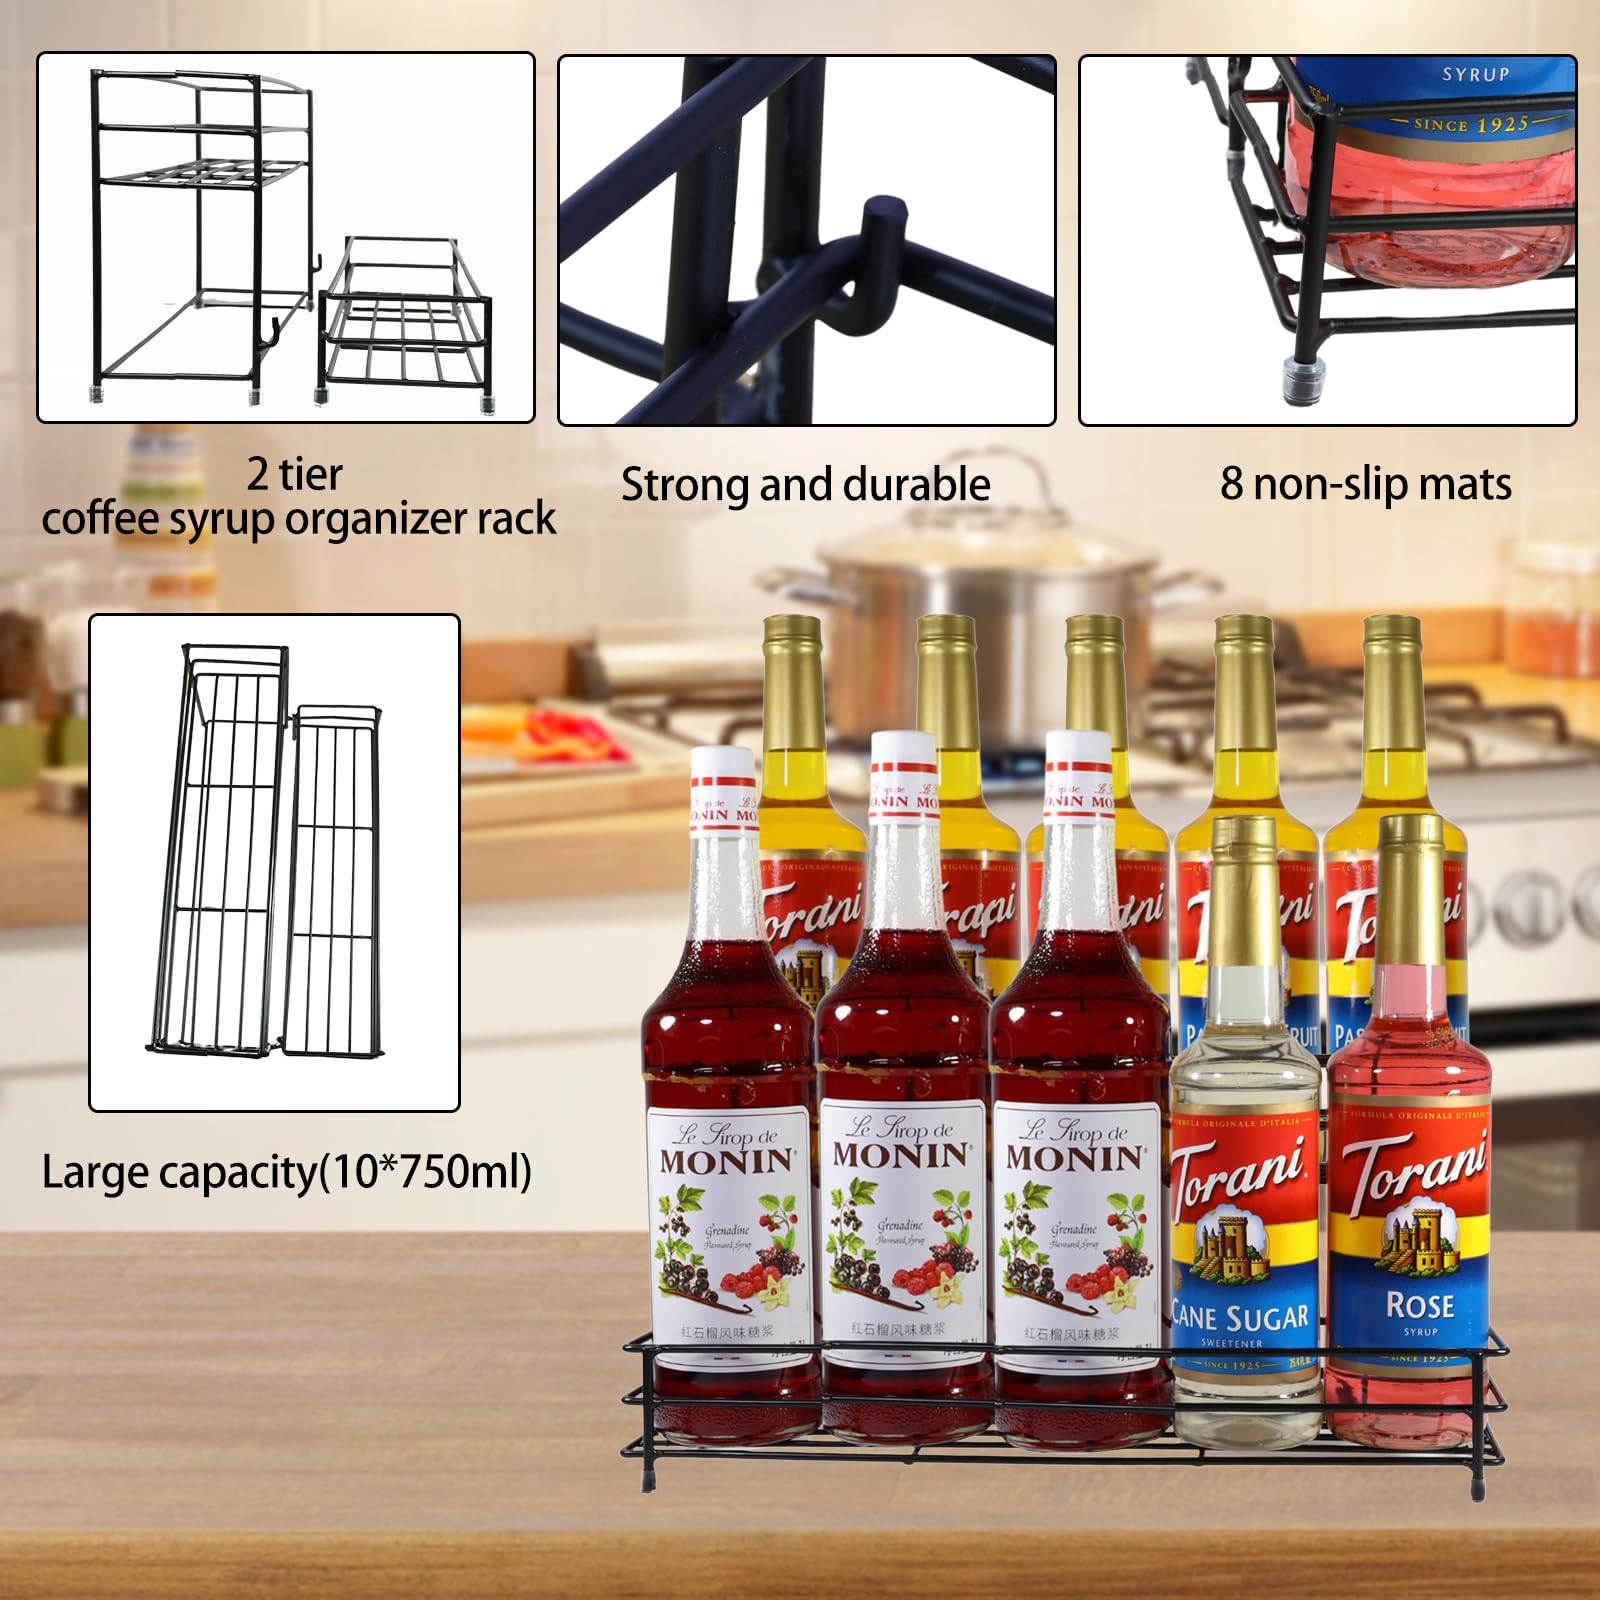 Coffee Syrup Organizer Rack, 2 Tier Coffee Syrup Stand Holder for Coffee Bar, 10 Bottles Wine Bottle Holder, Coffee Station Organizer Storage Shelf for Cocktail, Dressing, Coffee Bar Accessories